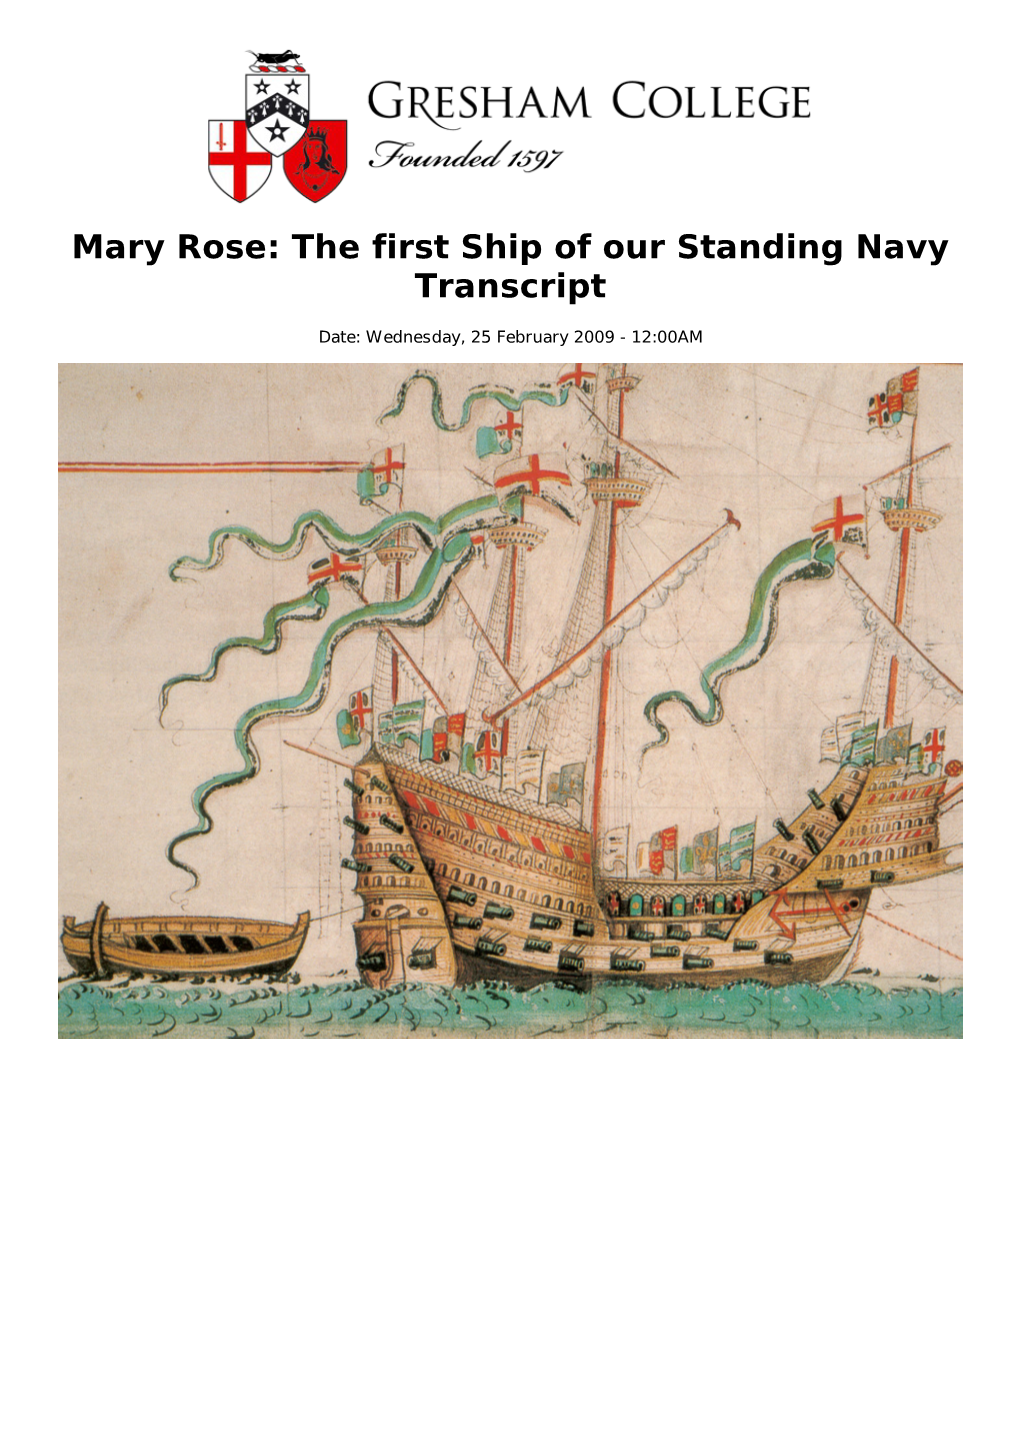 Mary Rose: the First Ship of Our Standing Navy Transcript